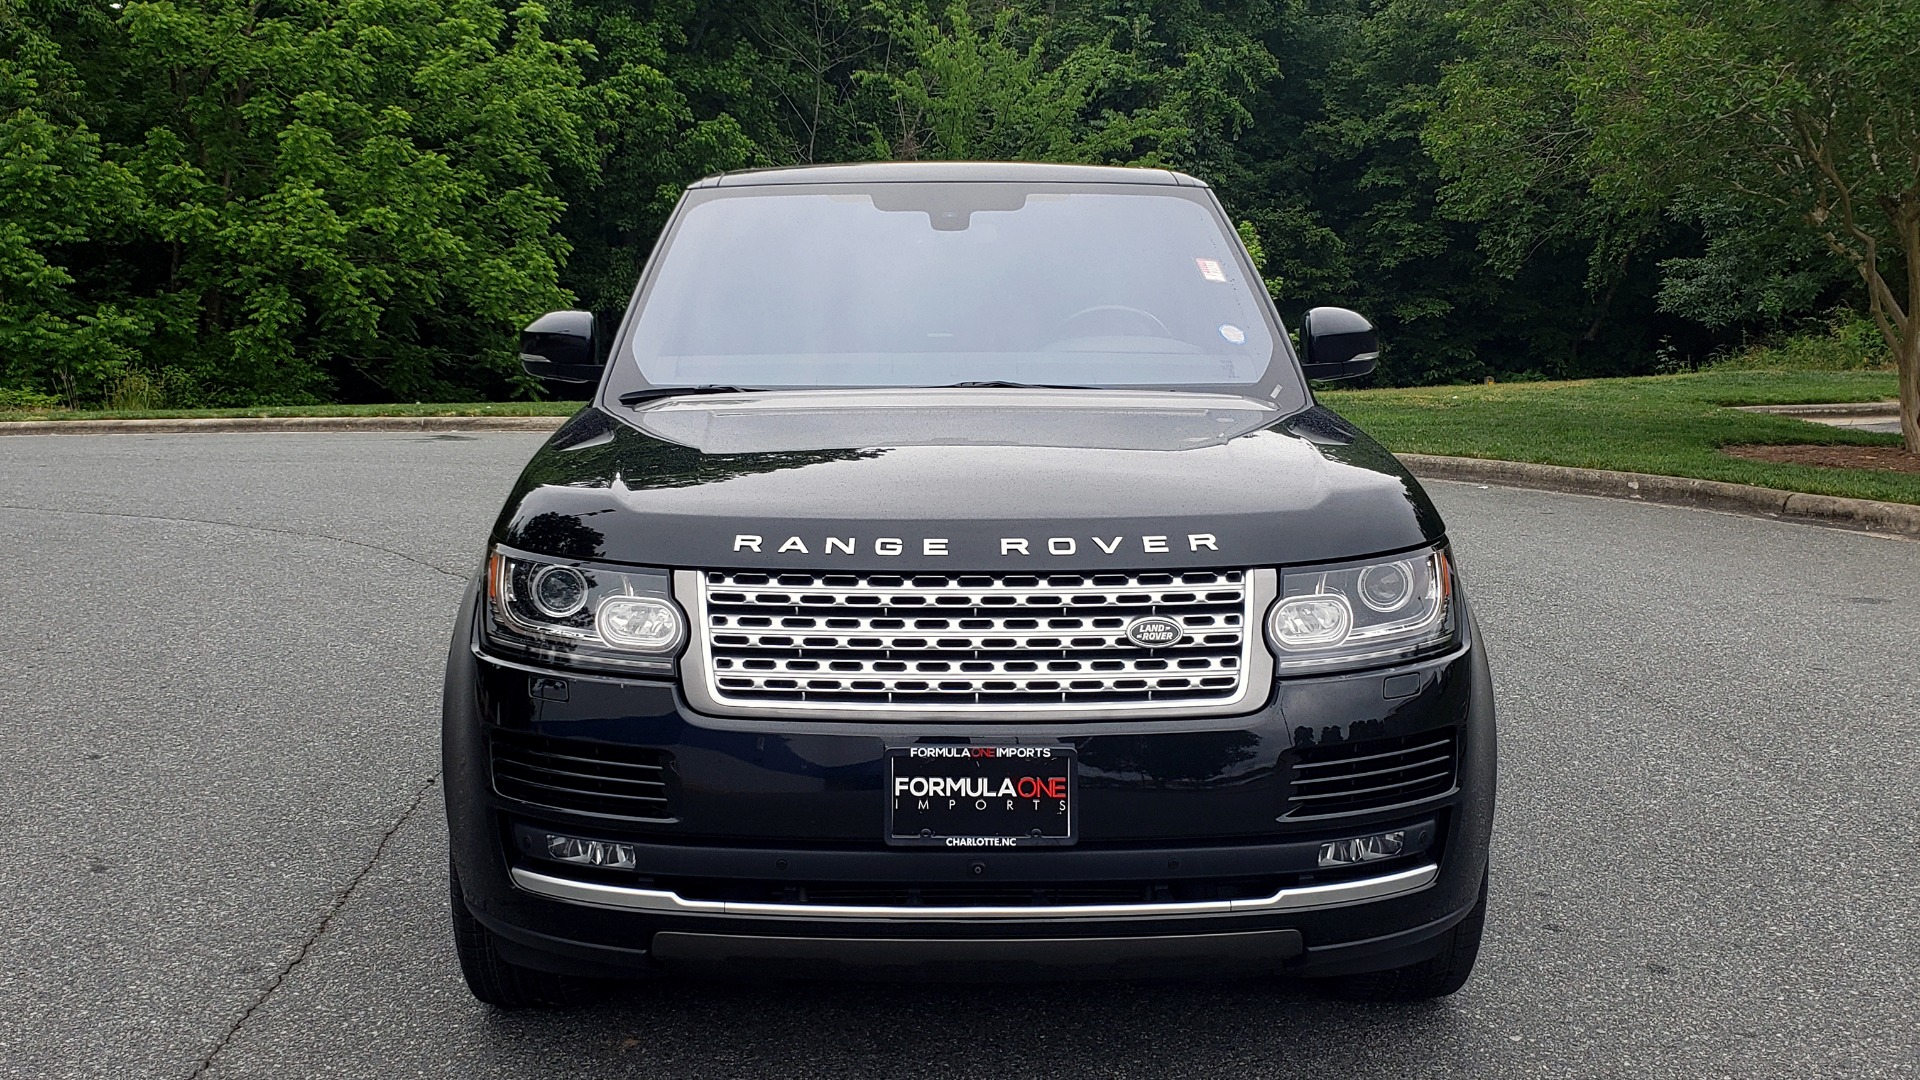 Used 2016 Land Rover RANGE ROVER HSE 3.0L / NAV / PANO / VENT SEATS / REARVIEW / BLIND SPOT for sale Sold at Formula Imports in Charlotte NC 28227 8